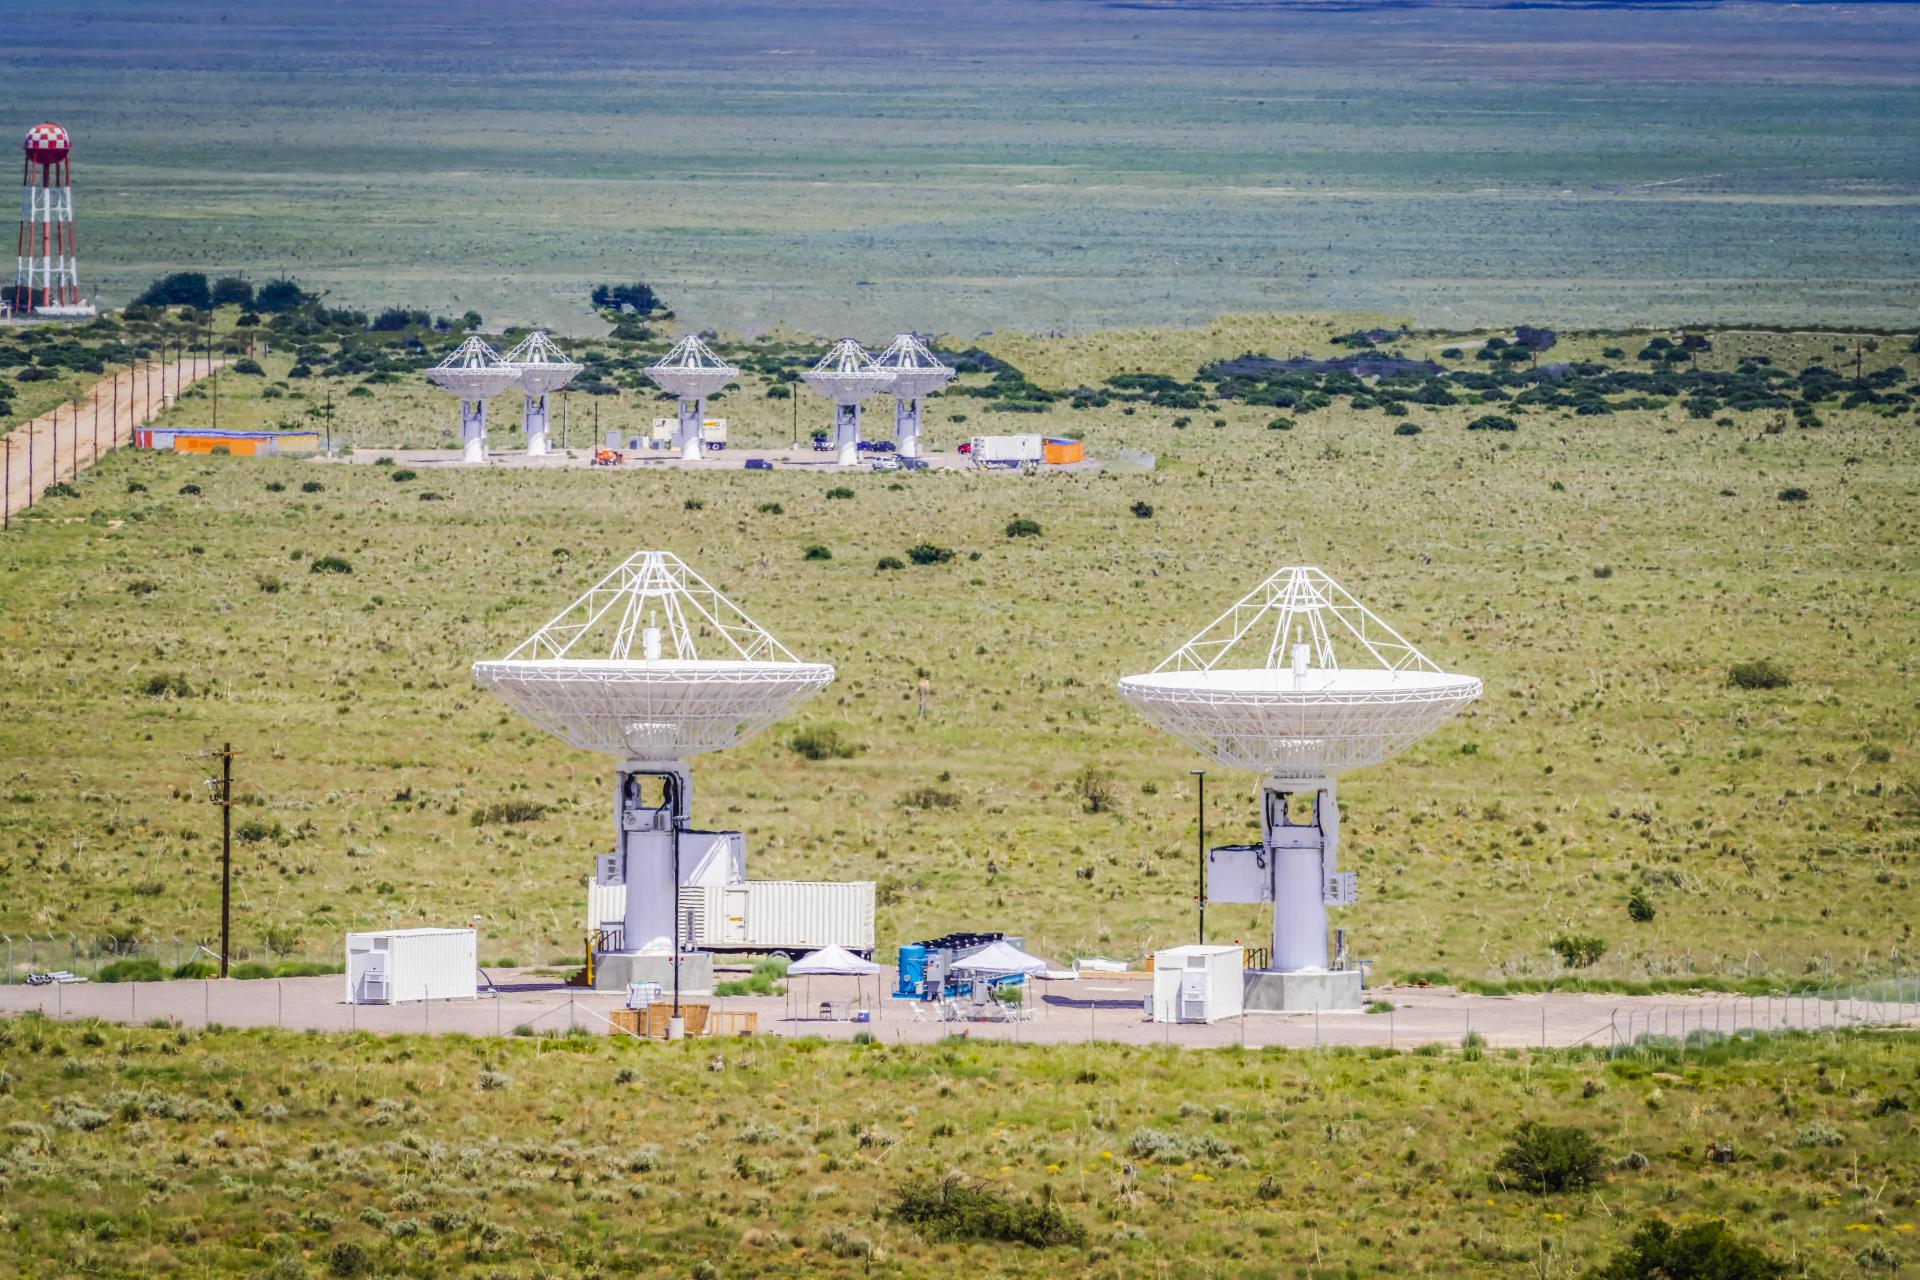 Two DARC satellites in a field